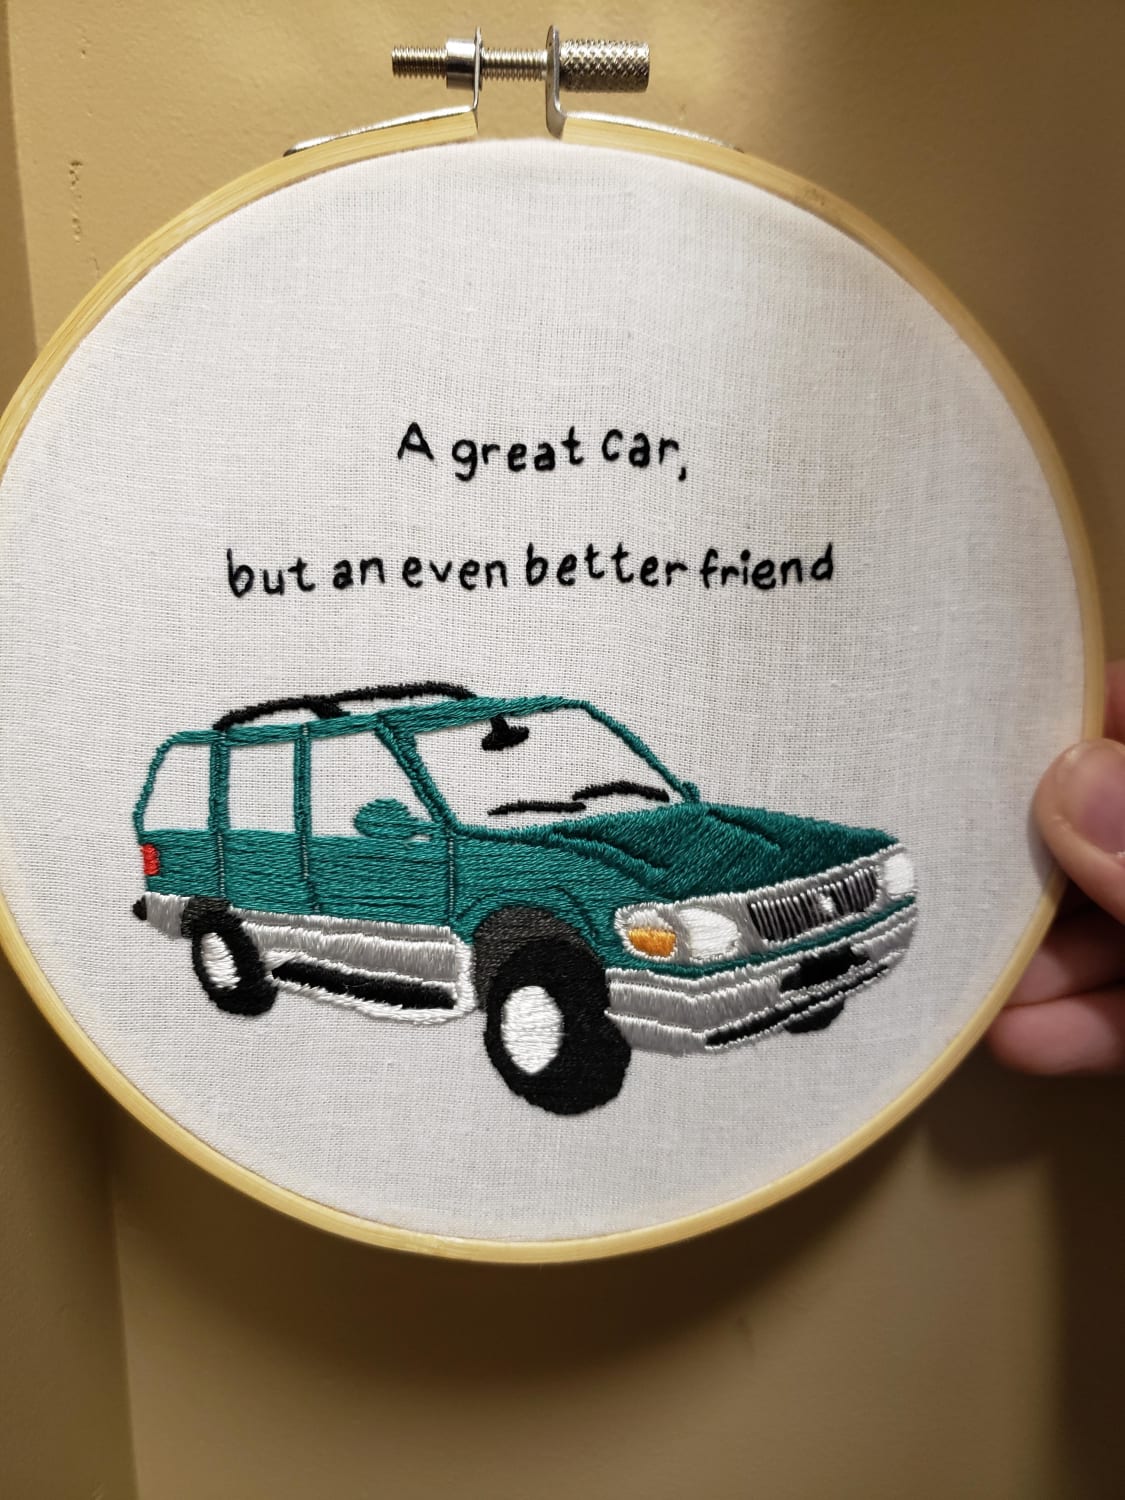 My brother-in-law traded in his beloved Mountaineer last summer, so I went way out of my comfort zone to make him this hoop. He jokingly said this quote.